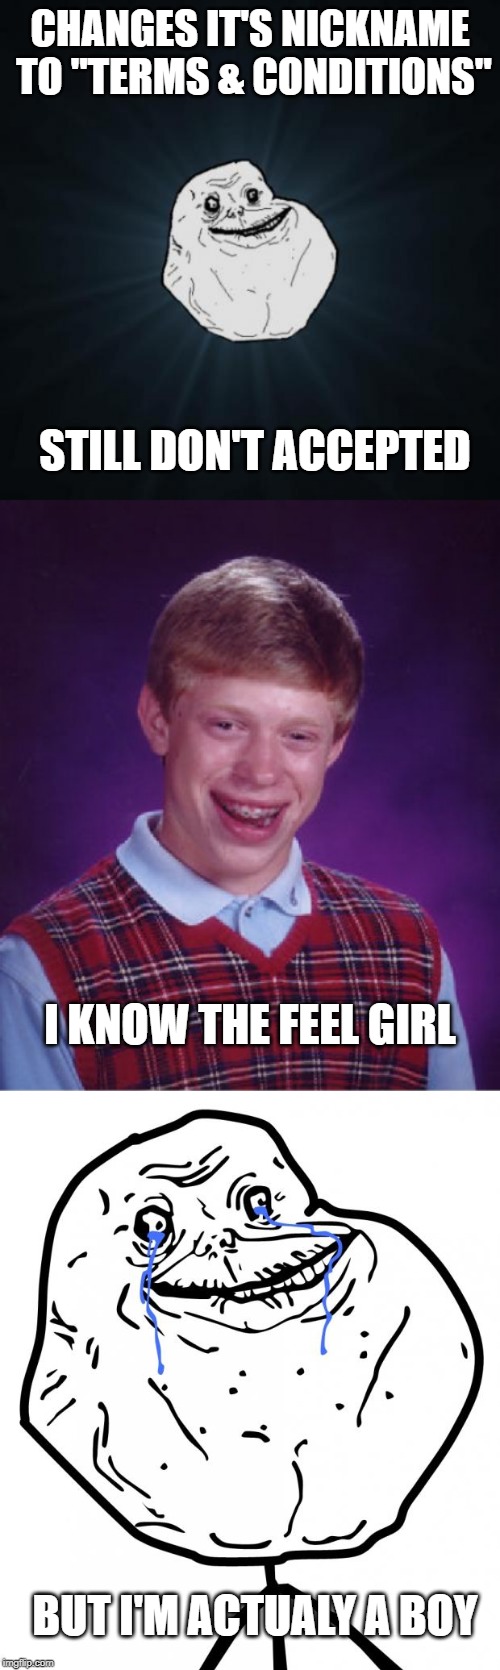 CHANGES IT'S NICKNAME TO "TERMS & CONDITIONS"; STILL DON'T ACCEPTED; I KNOW THE FEEL GIRL; BUT I'M ACTUALY A BOY | image tagged in memes,forever alone,bad luck brian,name,nickname | made w/ Imgflip meme maker